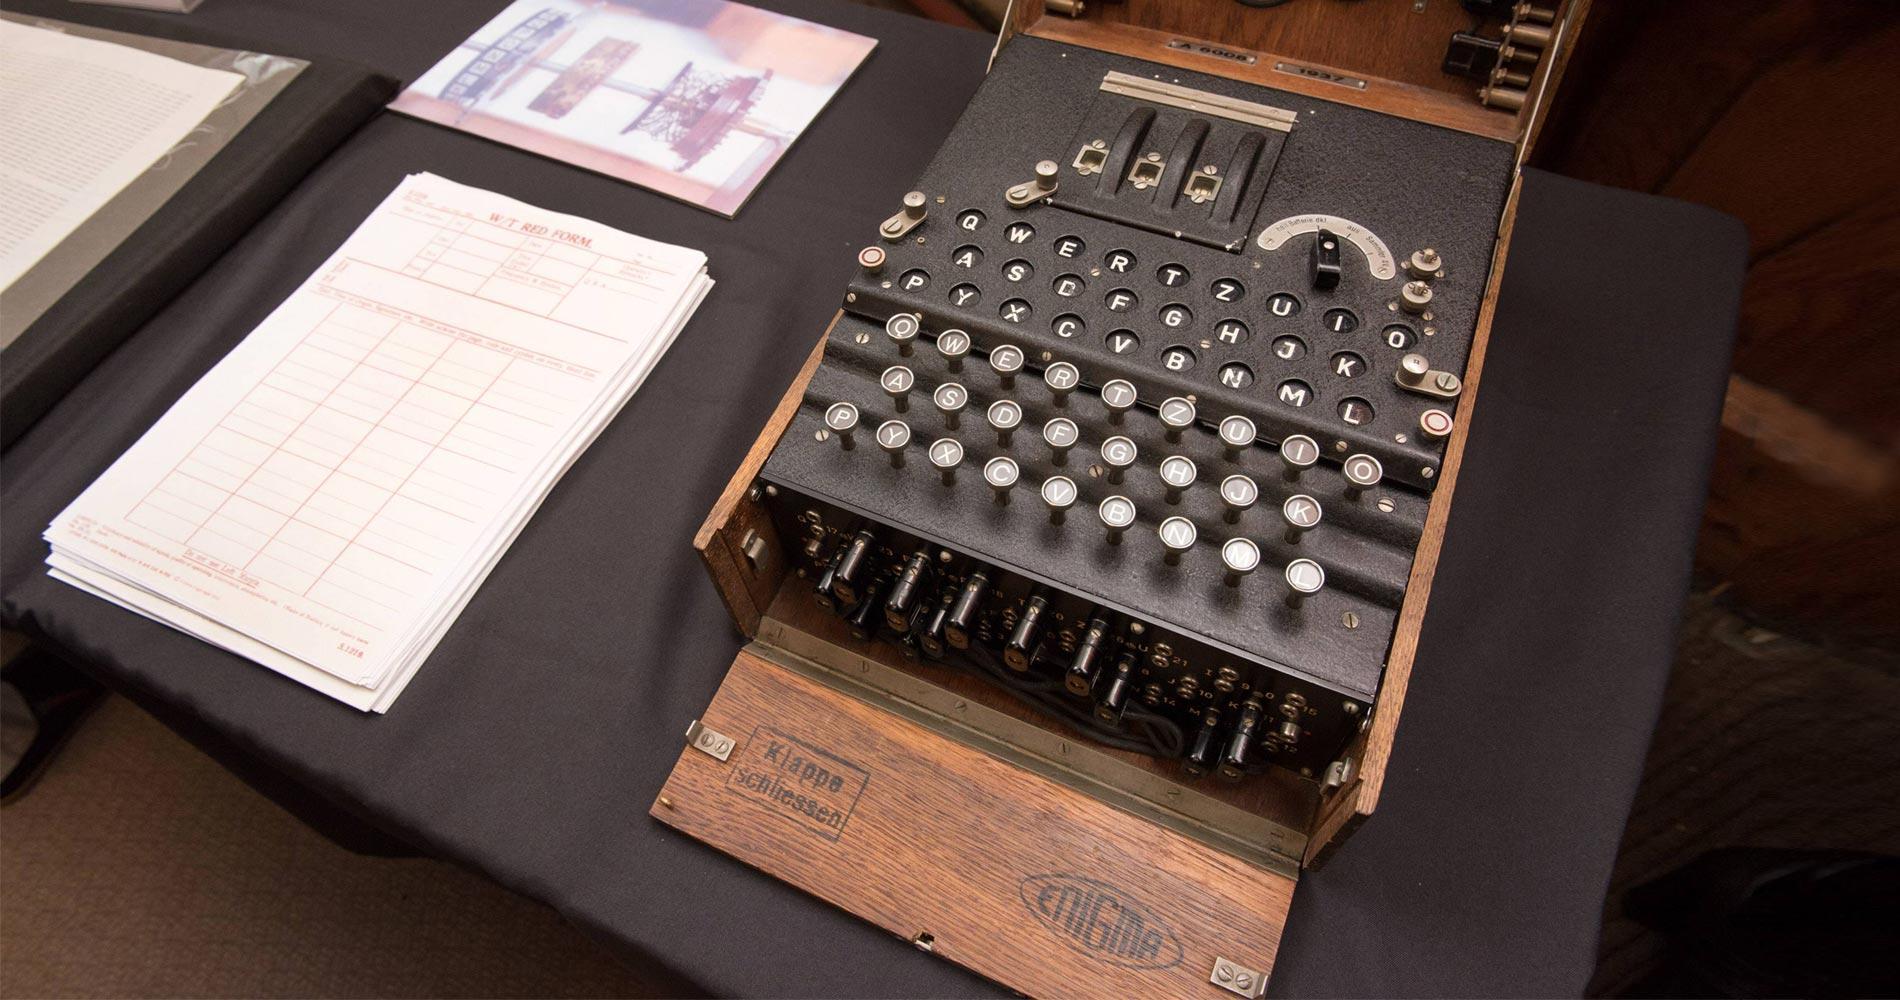 The Code-Breakers of the Enigma Machine: Fake News at its Finest